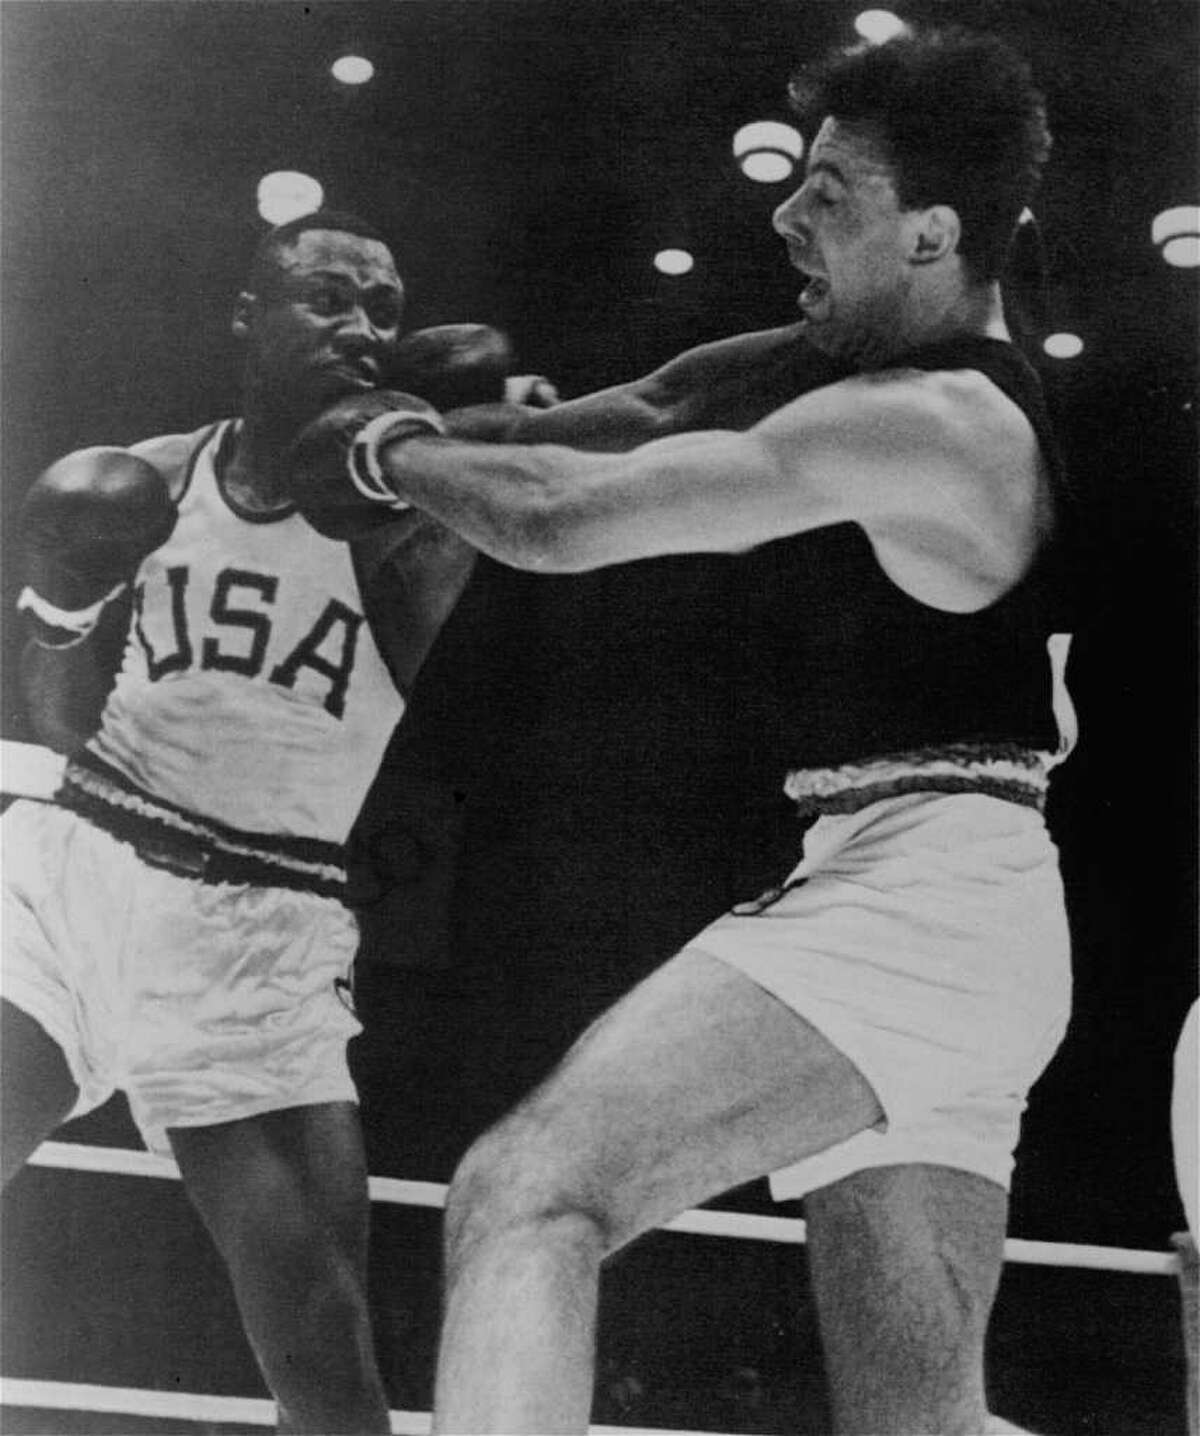 Frazier, left, throws a left to the head of Germany's Hans Huber in their Olympic title bout on Oct. 23, 1964 in Tokyo.